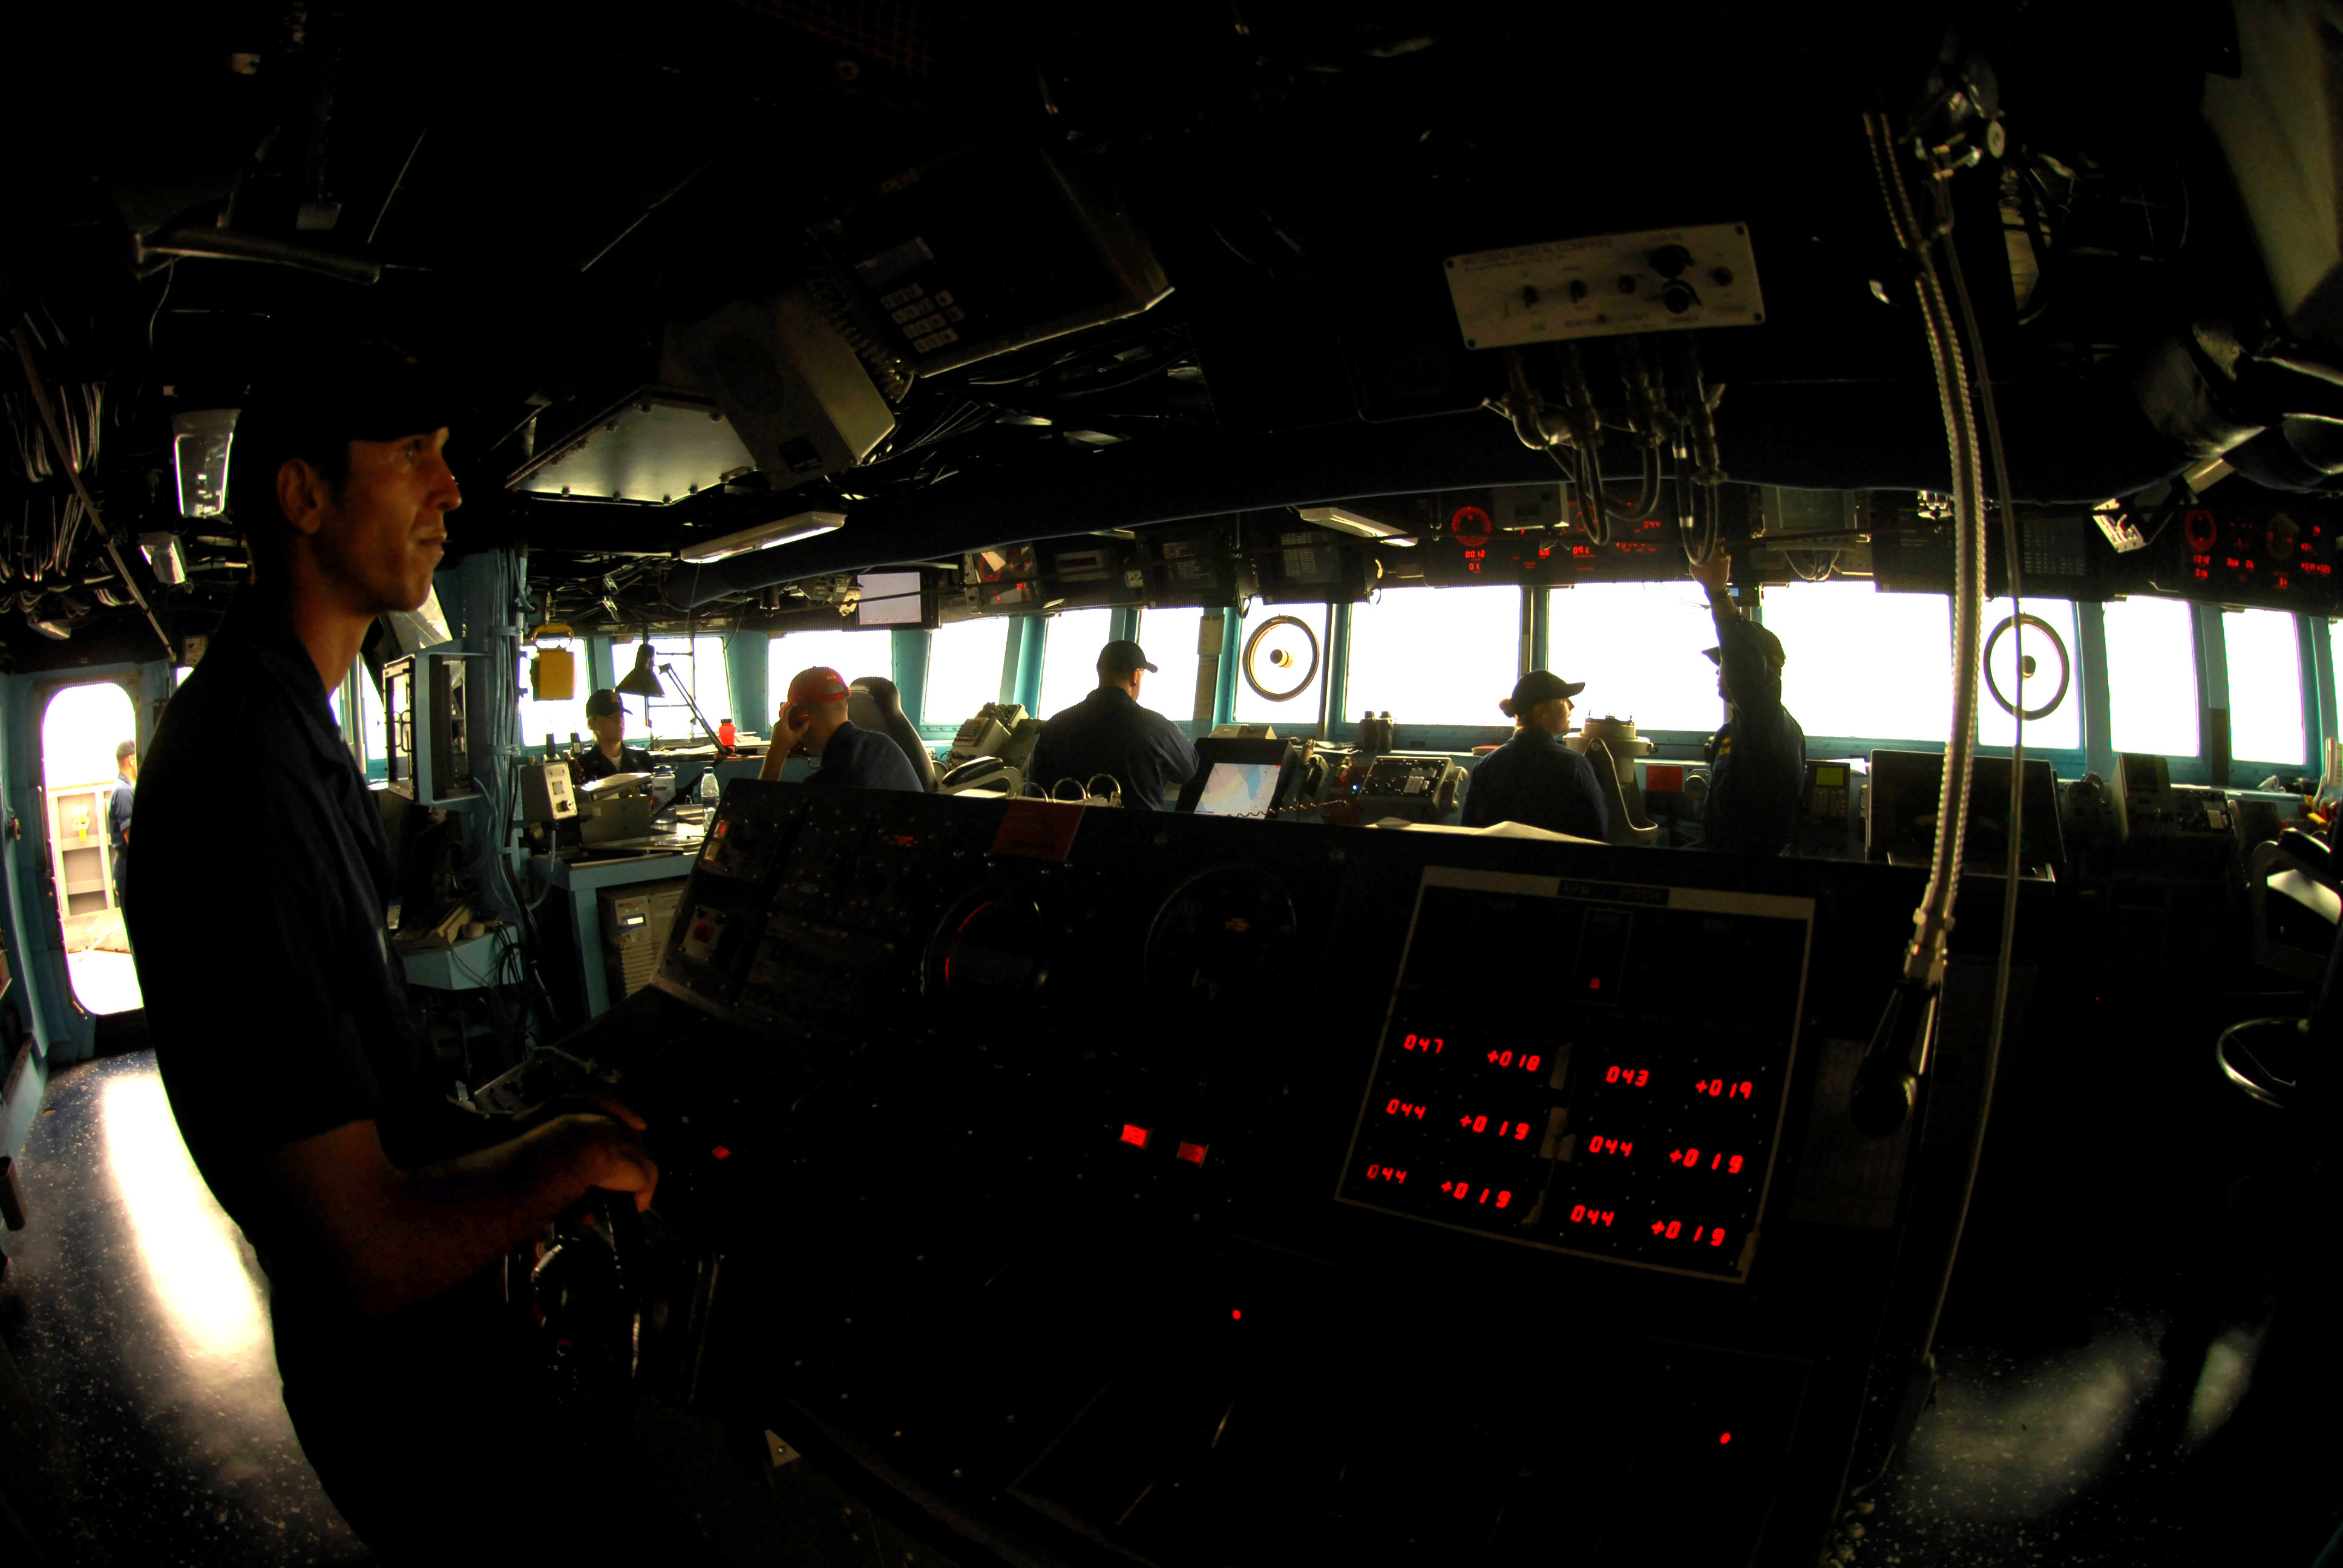 US Navy 070518-N-0684R-026 Seaman John Moen mans the helm during low visibility conditions caused by a sandstorm at sea aboard Arleigh Burke-class guided-missile destroyer USS Preble (DDG 88)